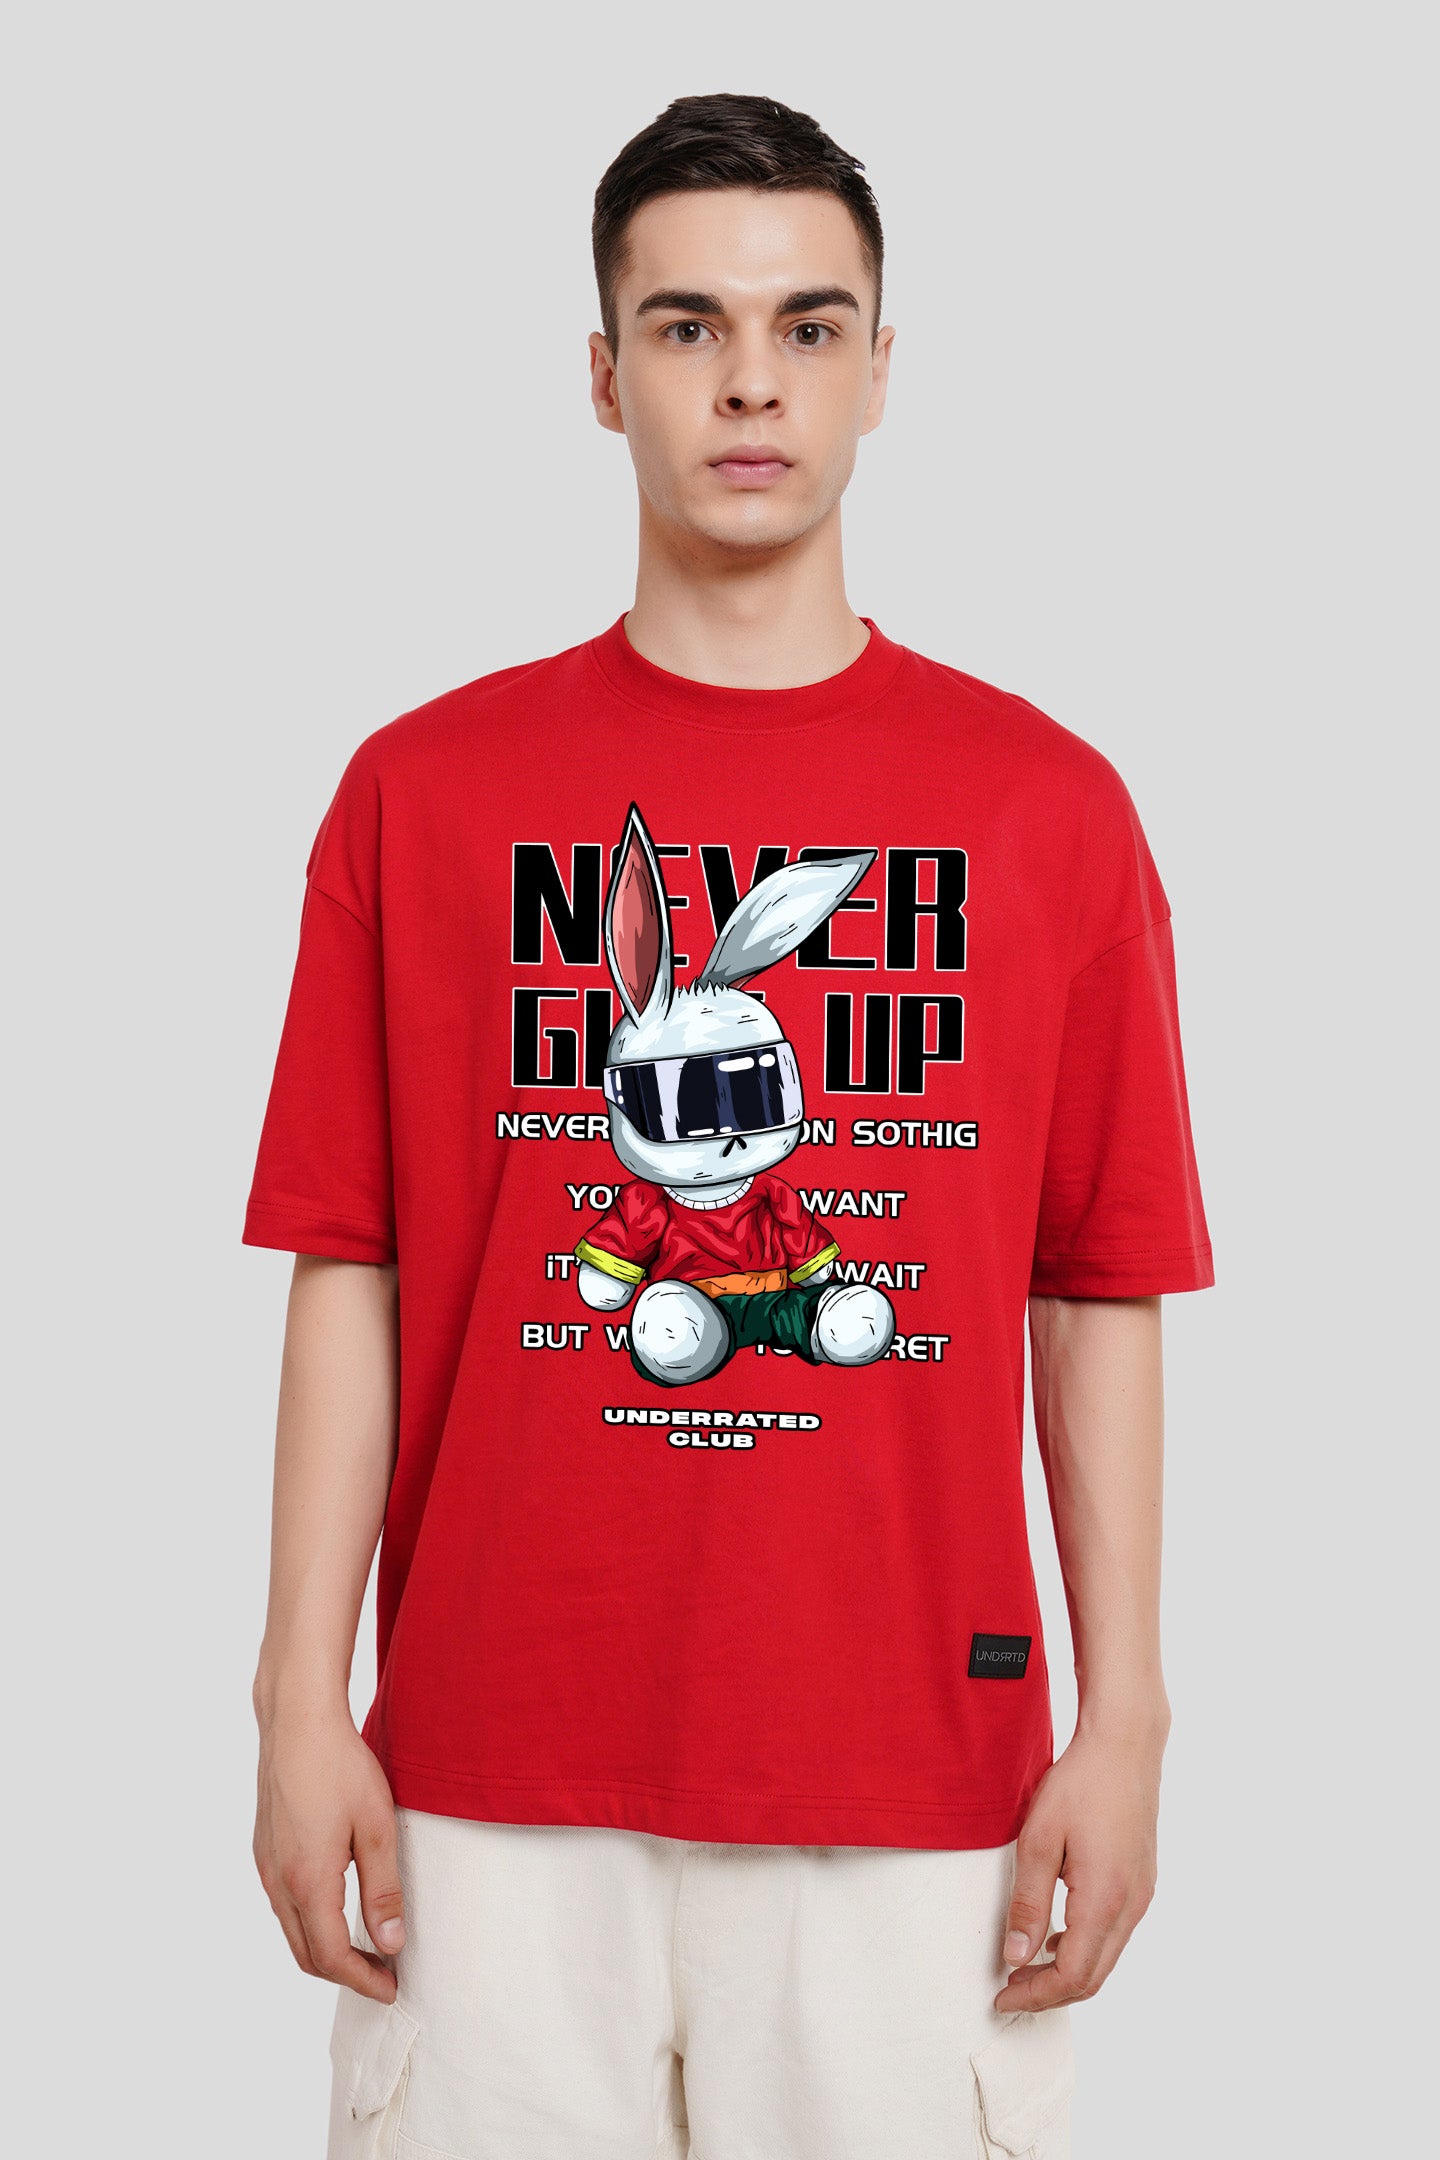 Never Give Up Red Printed T Shirt Men Baggy Fit With Front Design Pic 1